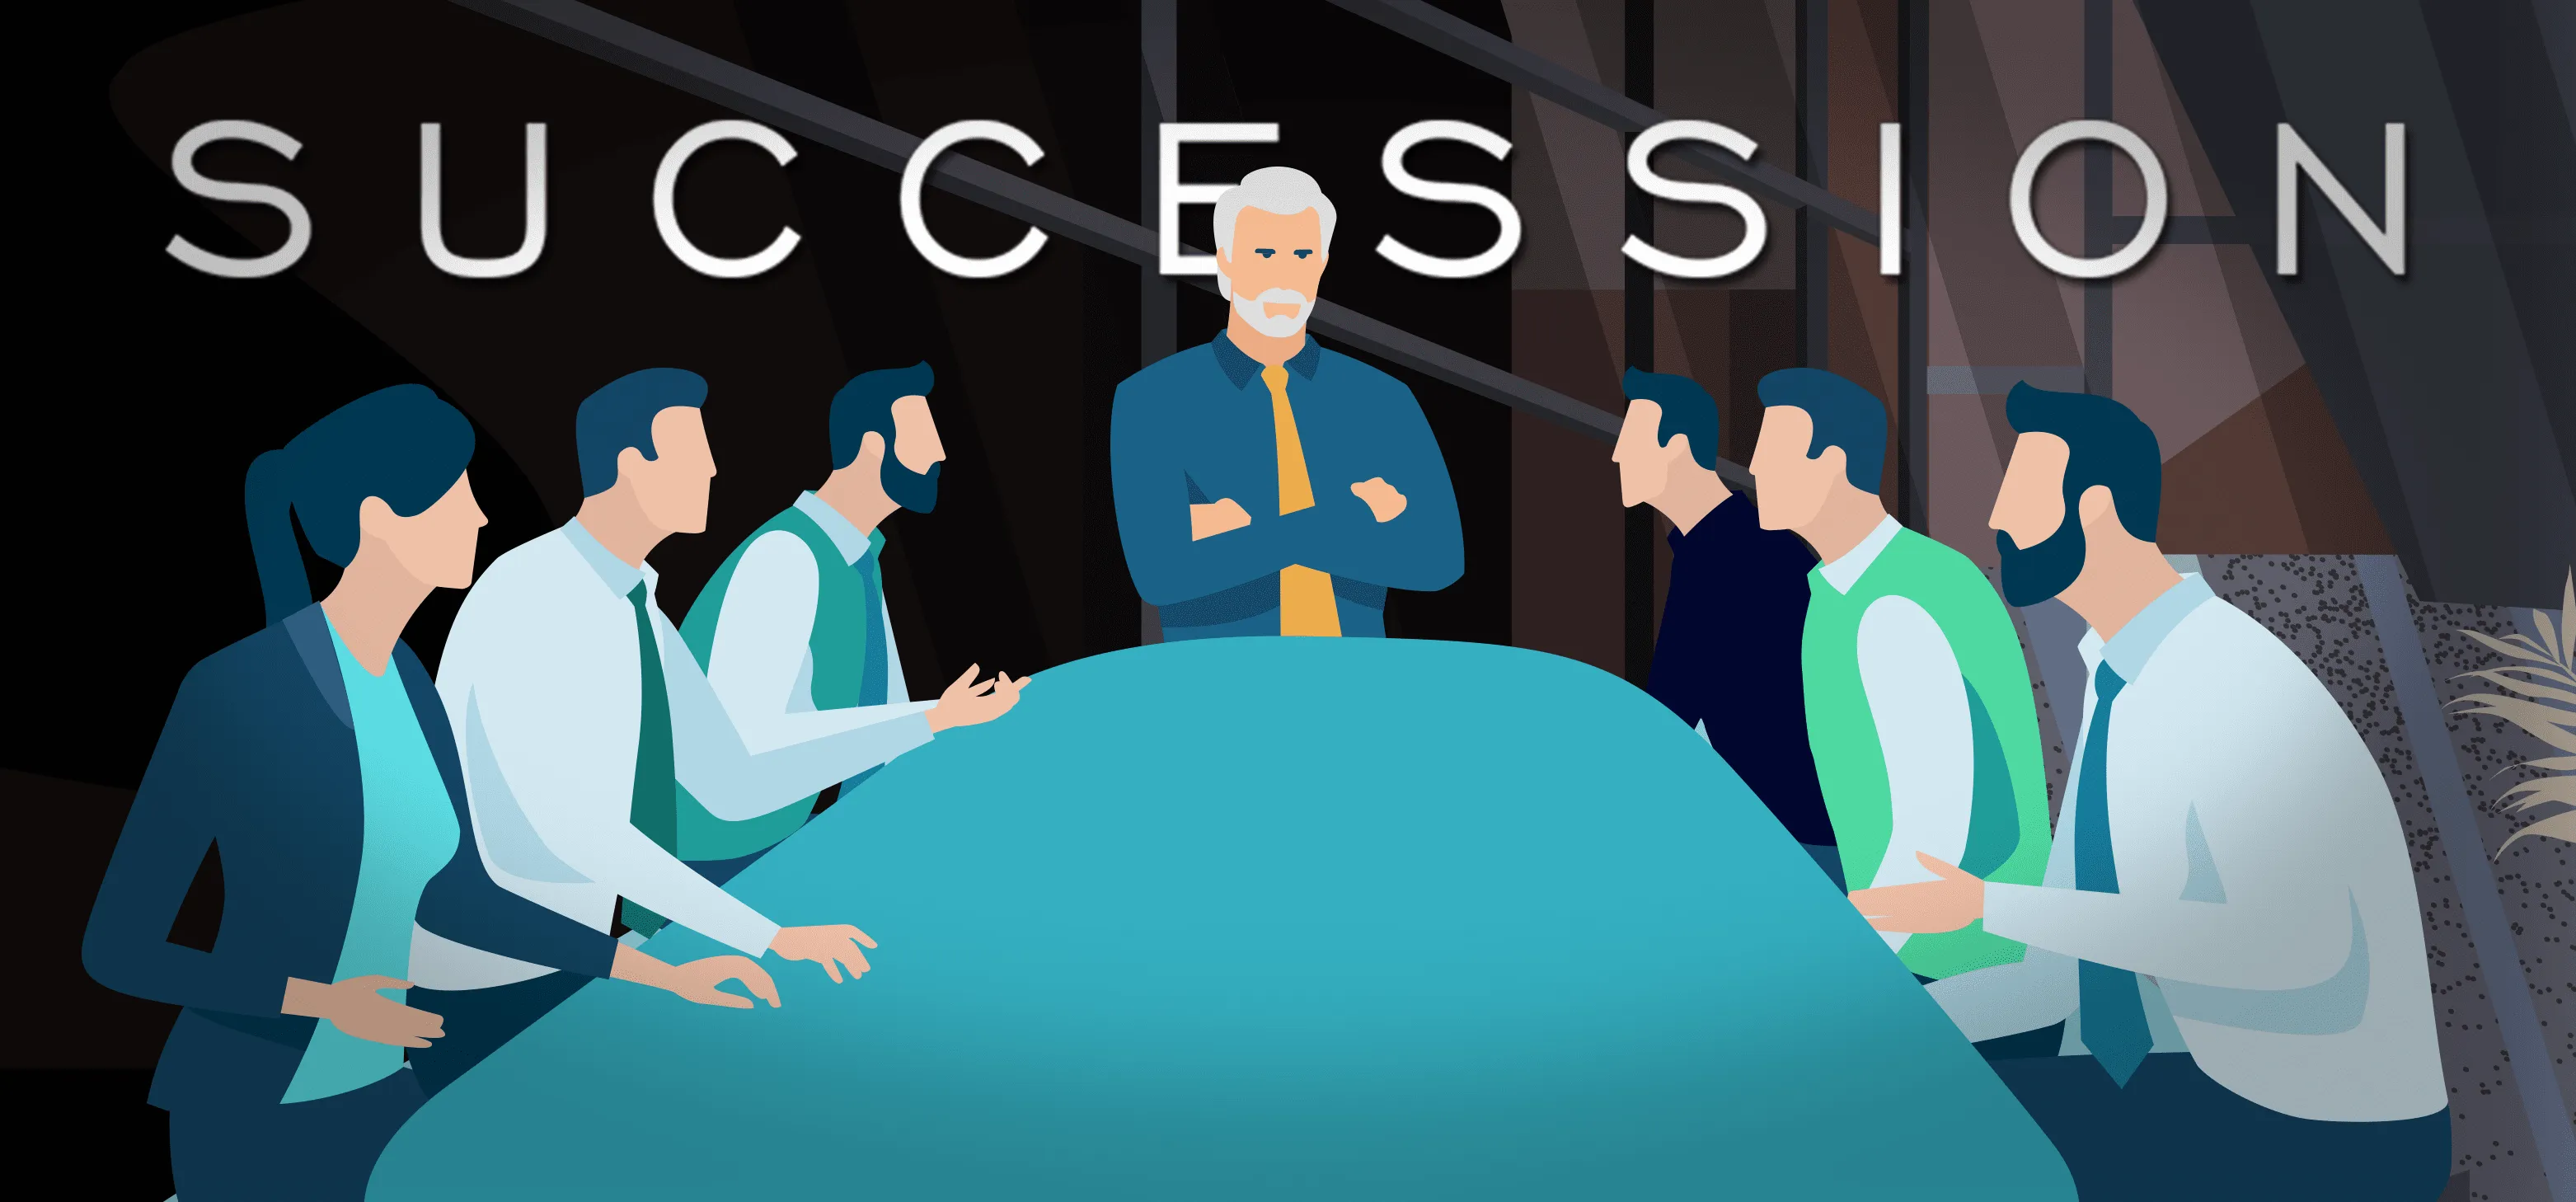 Business lessons from the show Succession